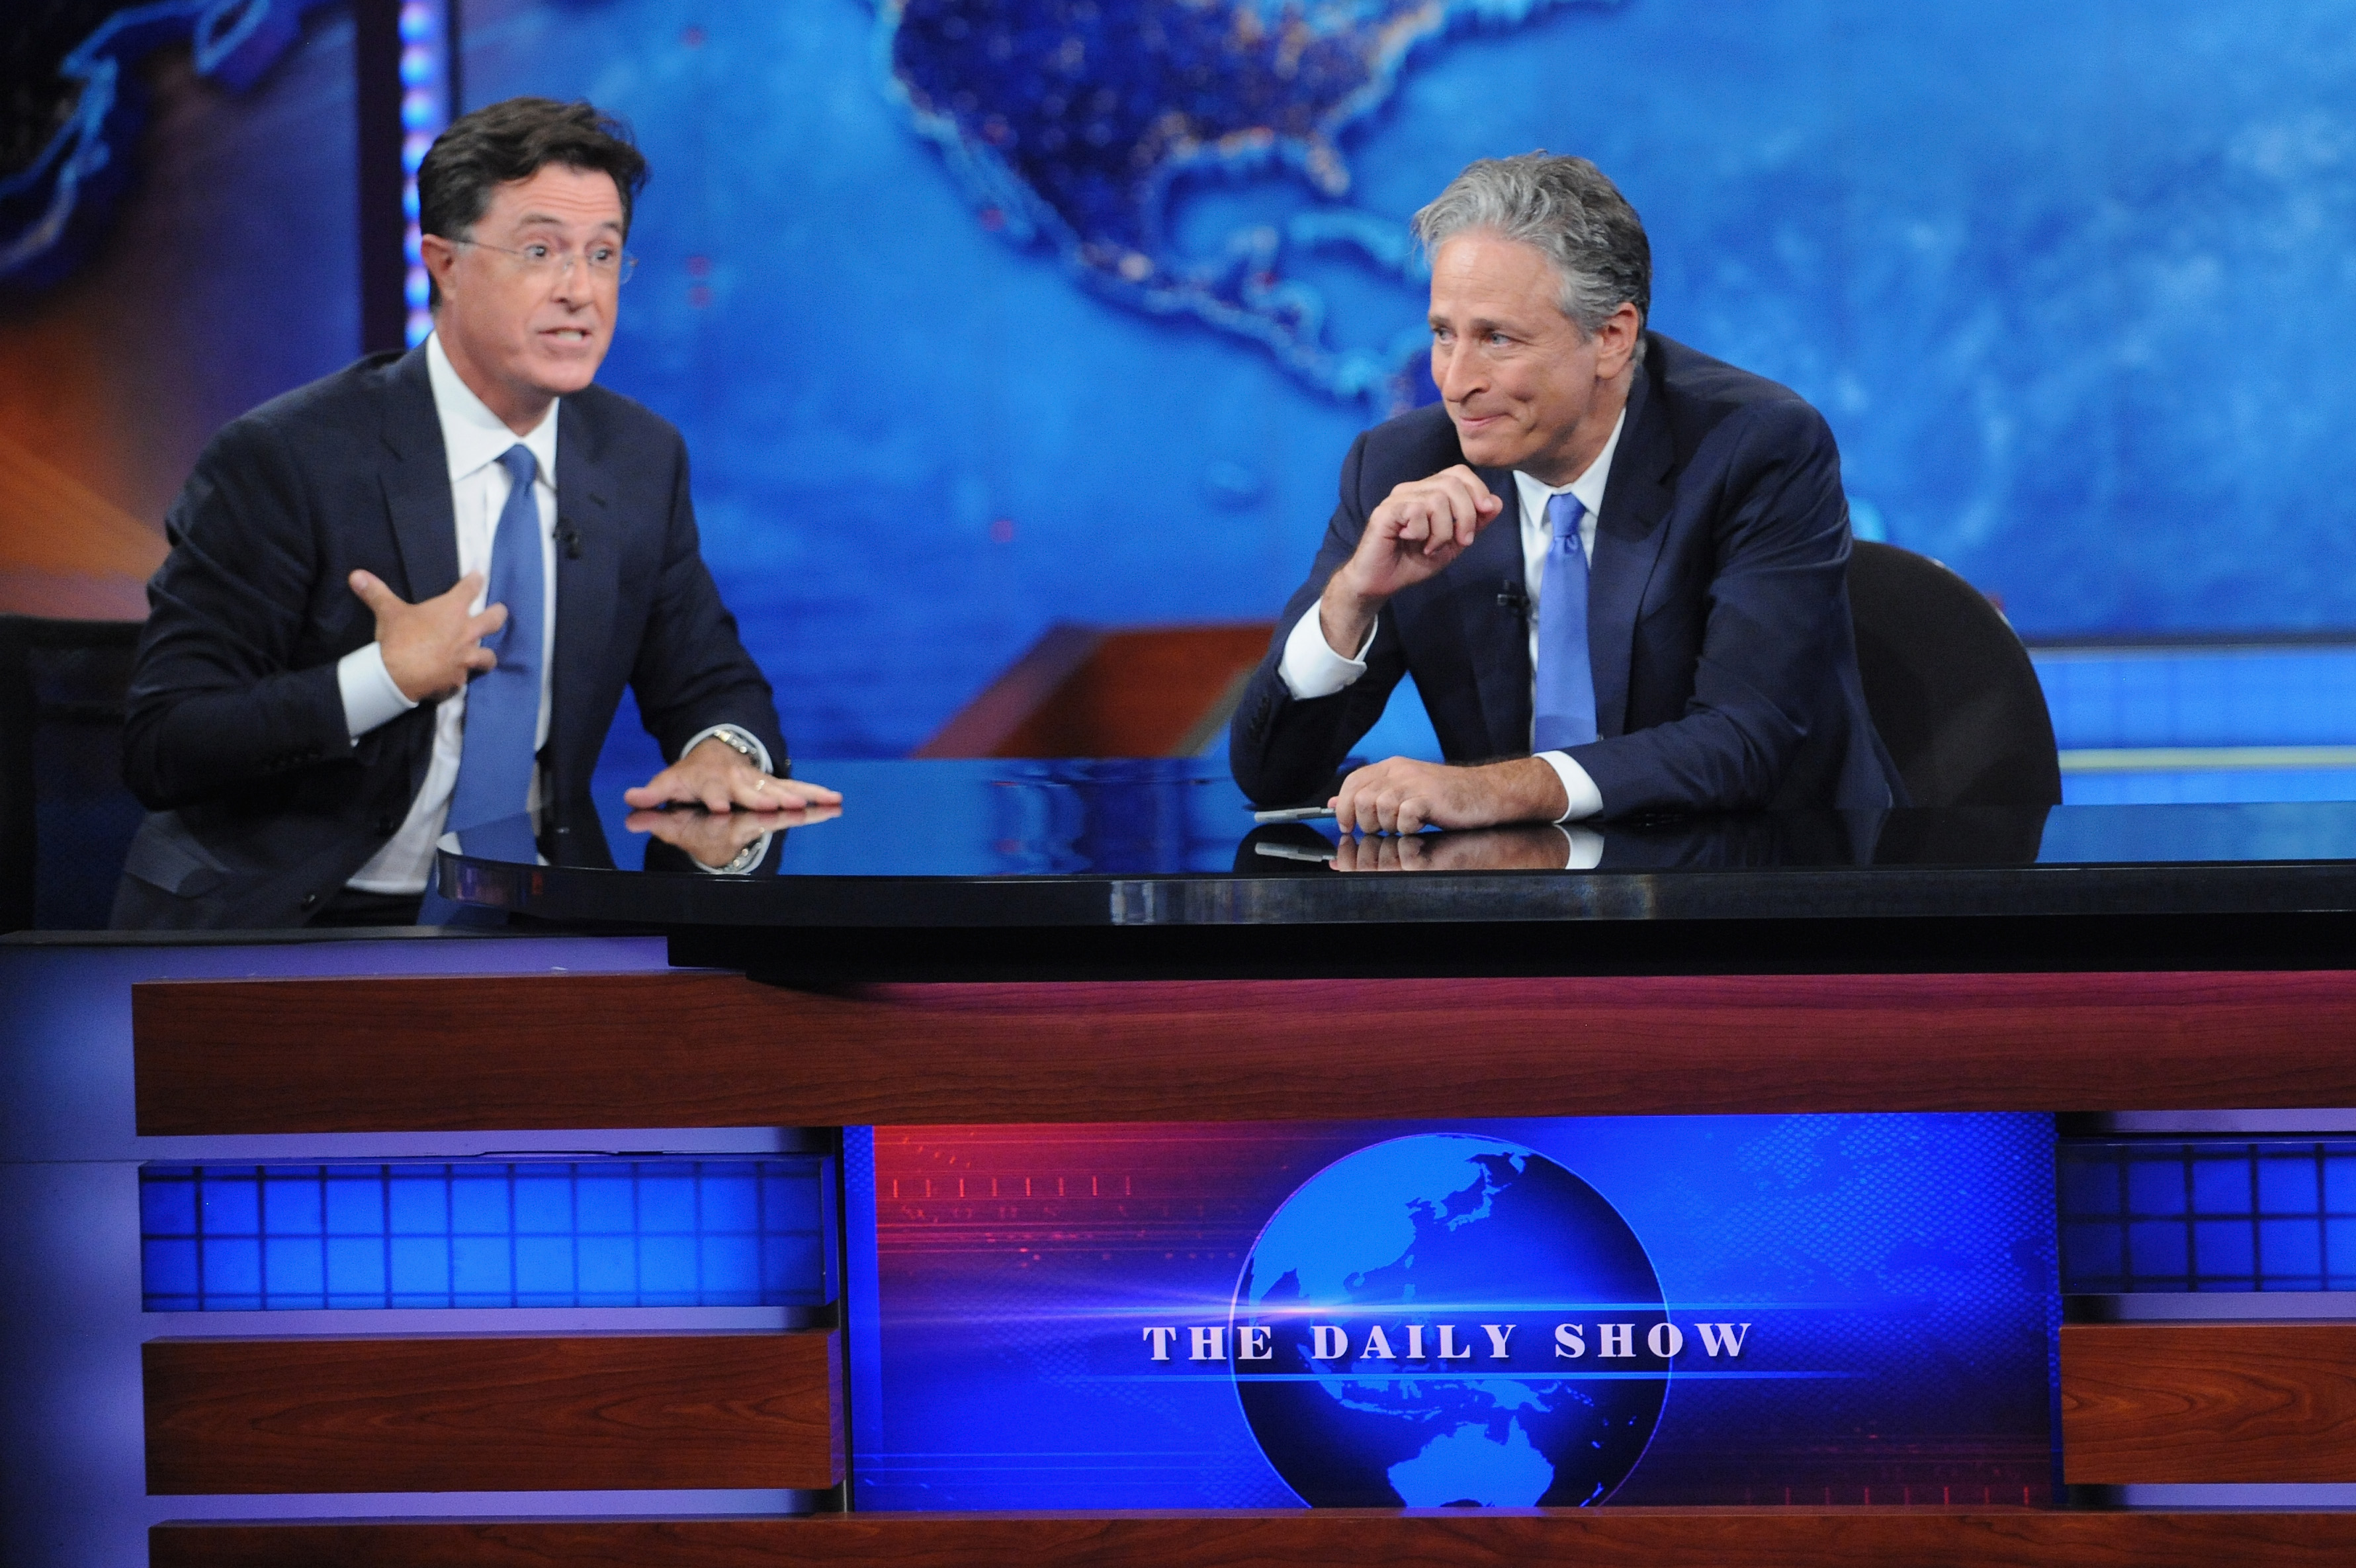 Stephen Colbert and Jon Stewart appear on "The Daily Show with Jon Stewart" #JonVoyage on August 6, 2015 in New York City. 